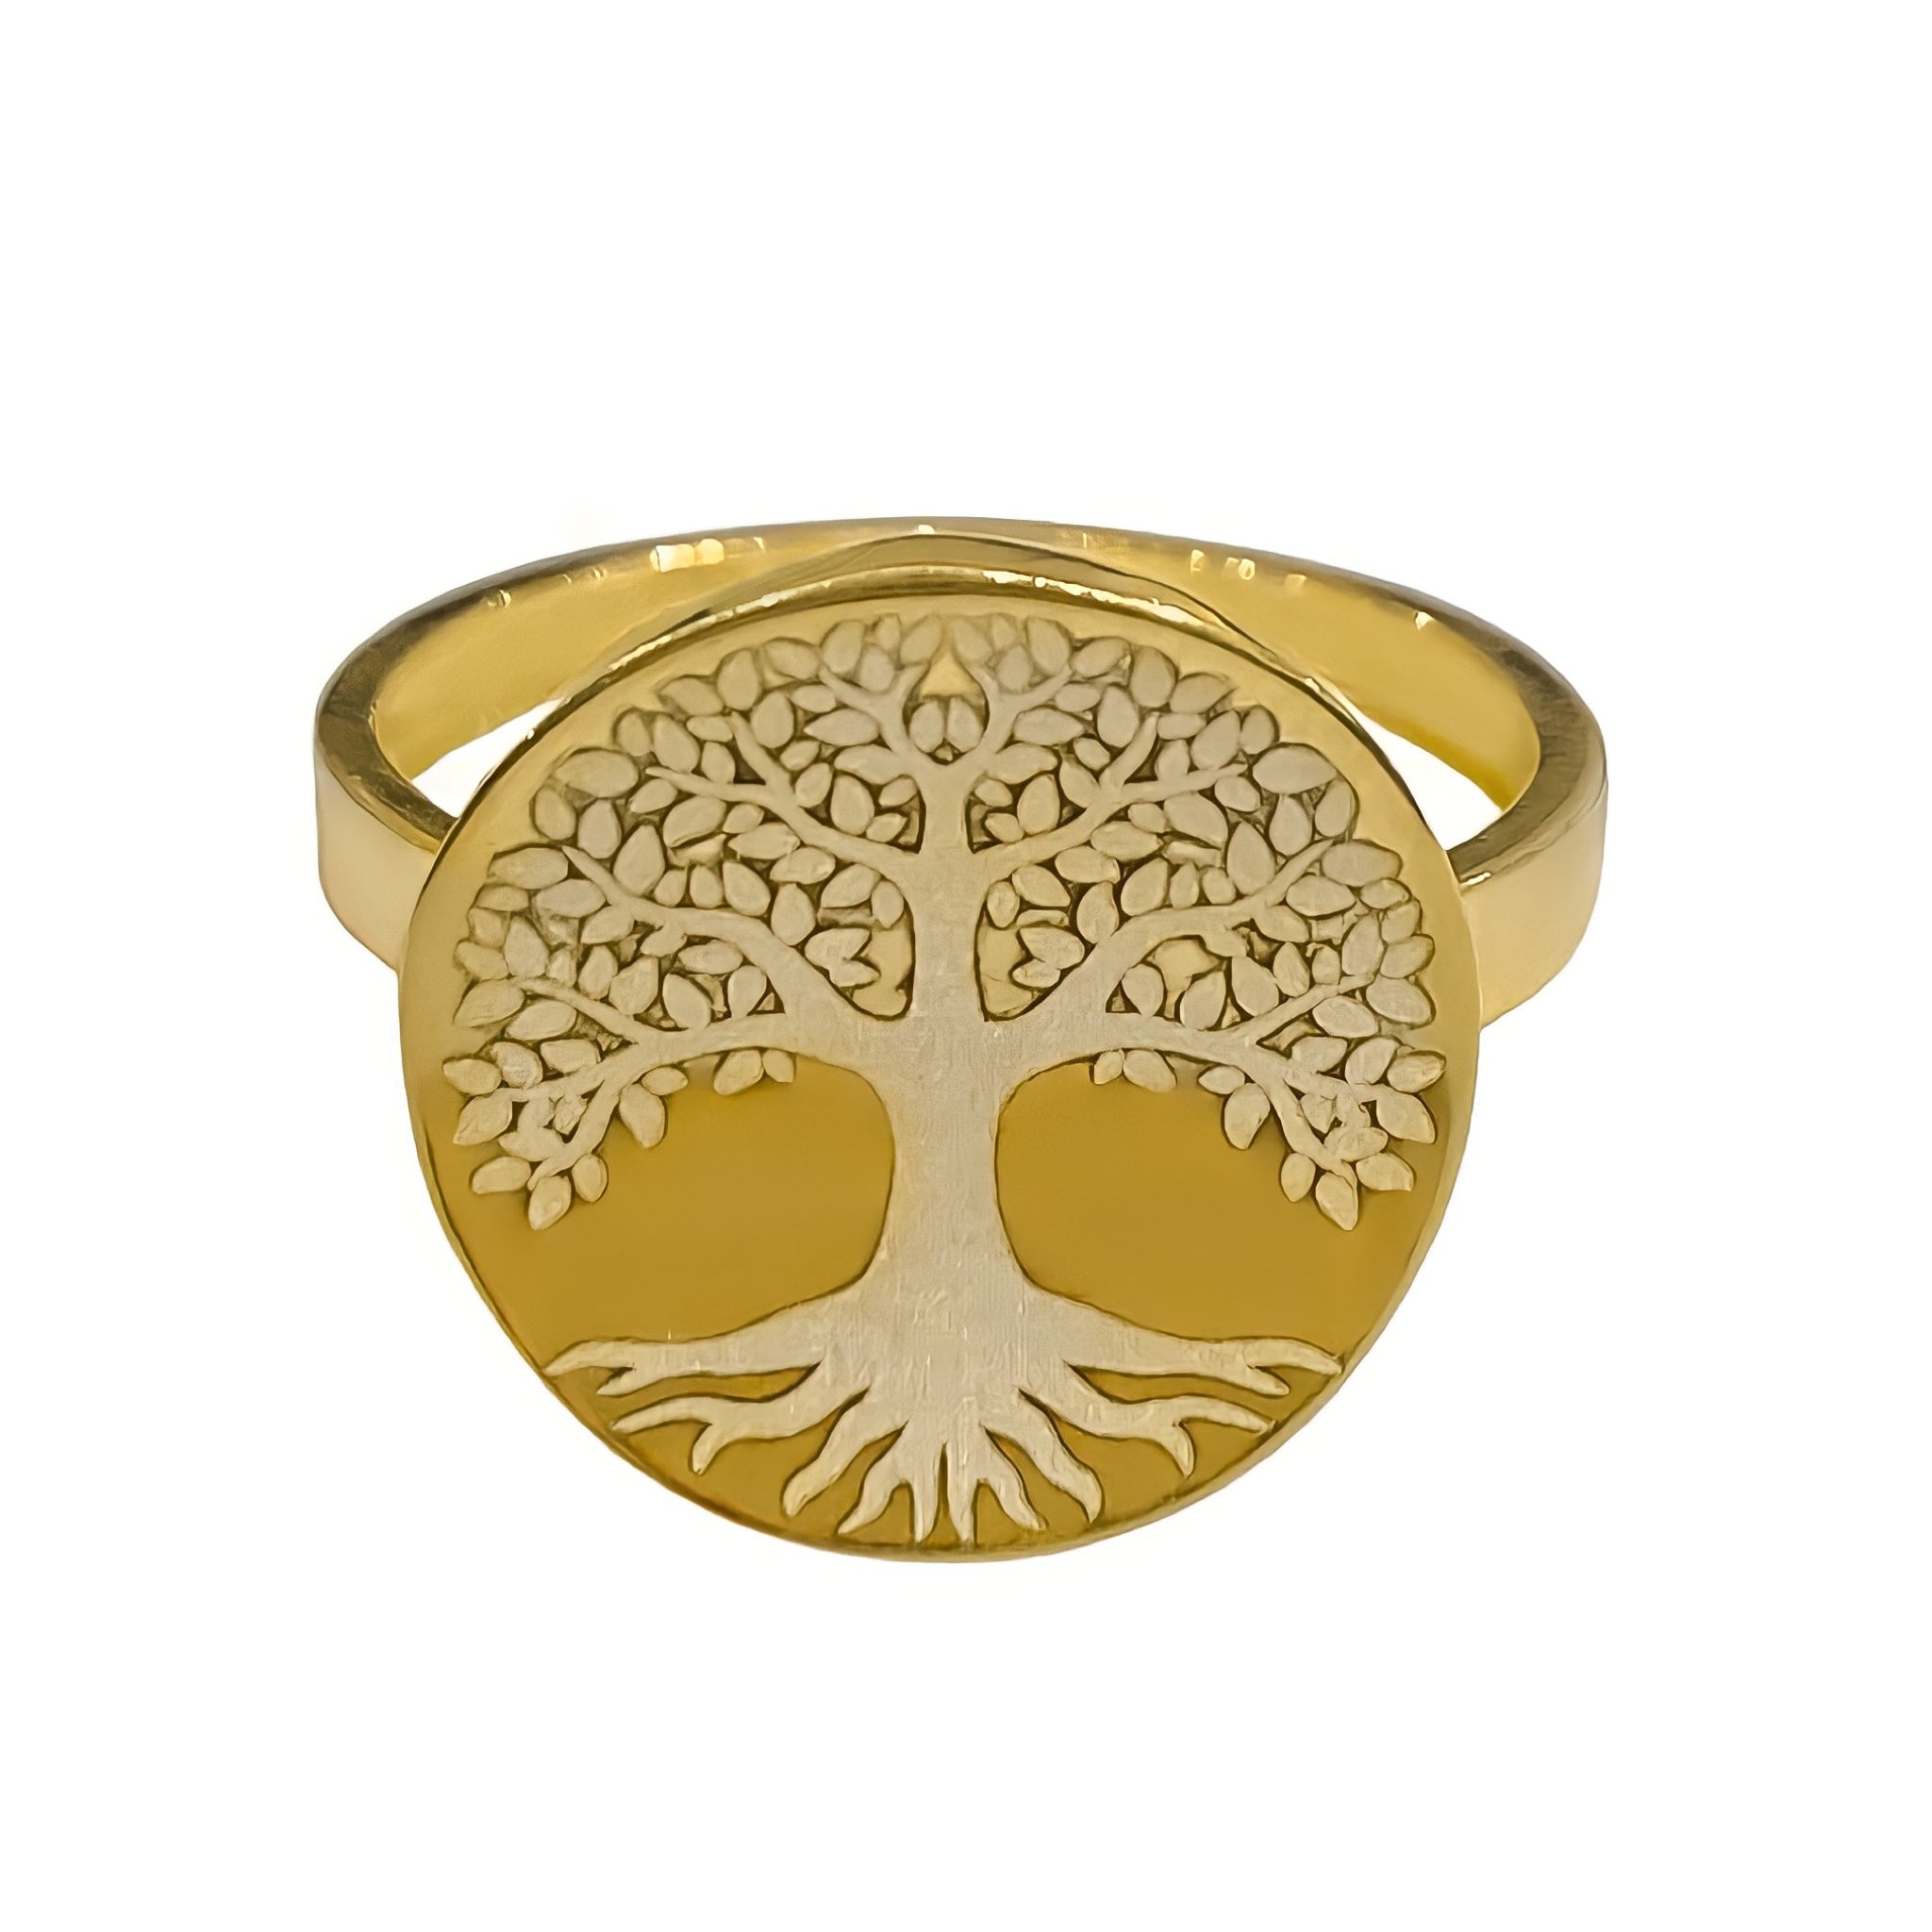 14K YELLOW GOLD TREE OF LIFE RING